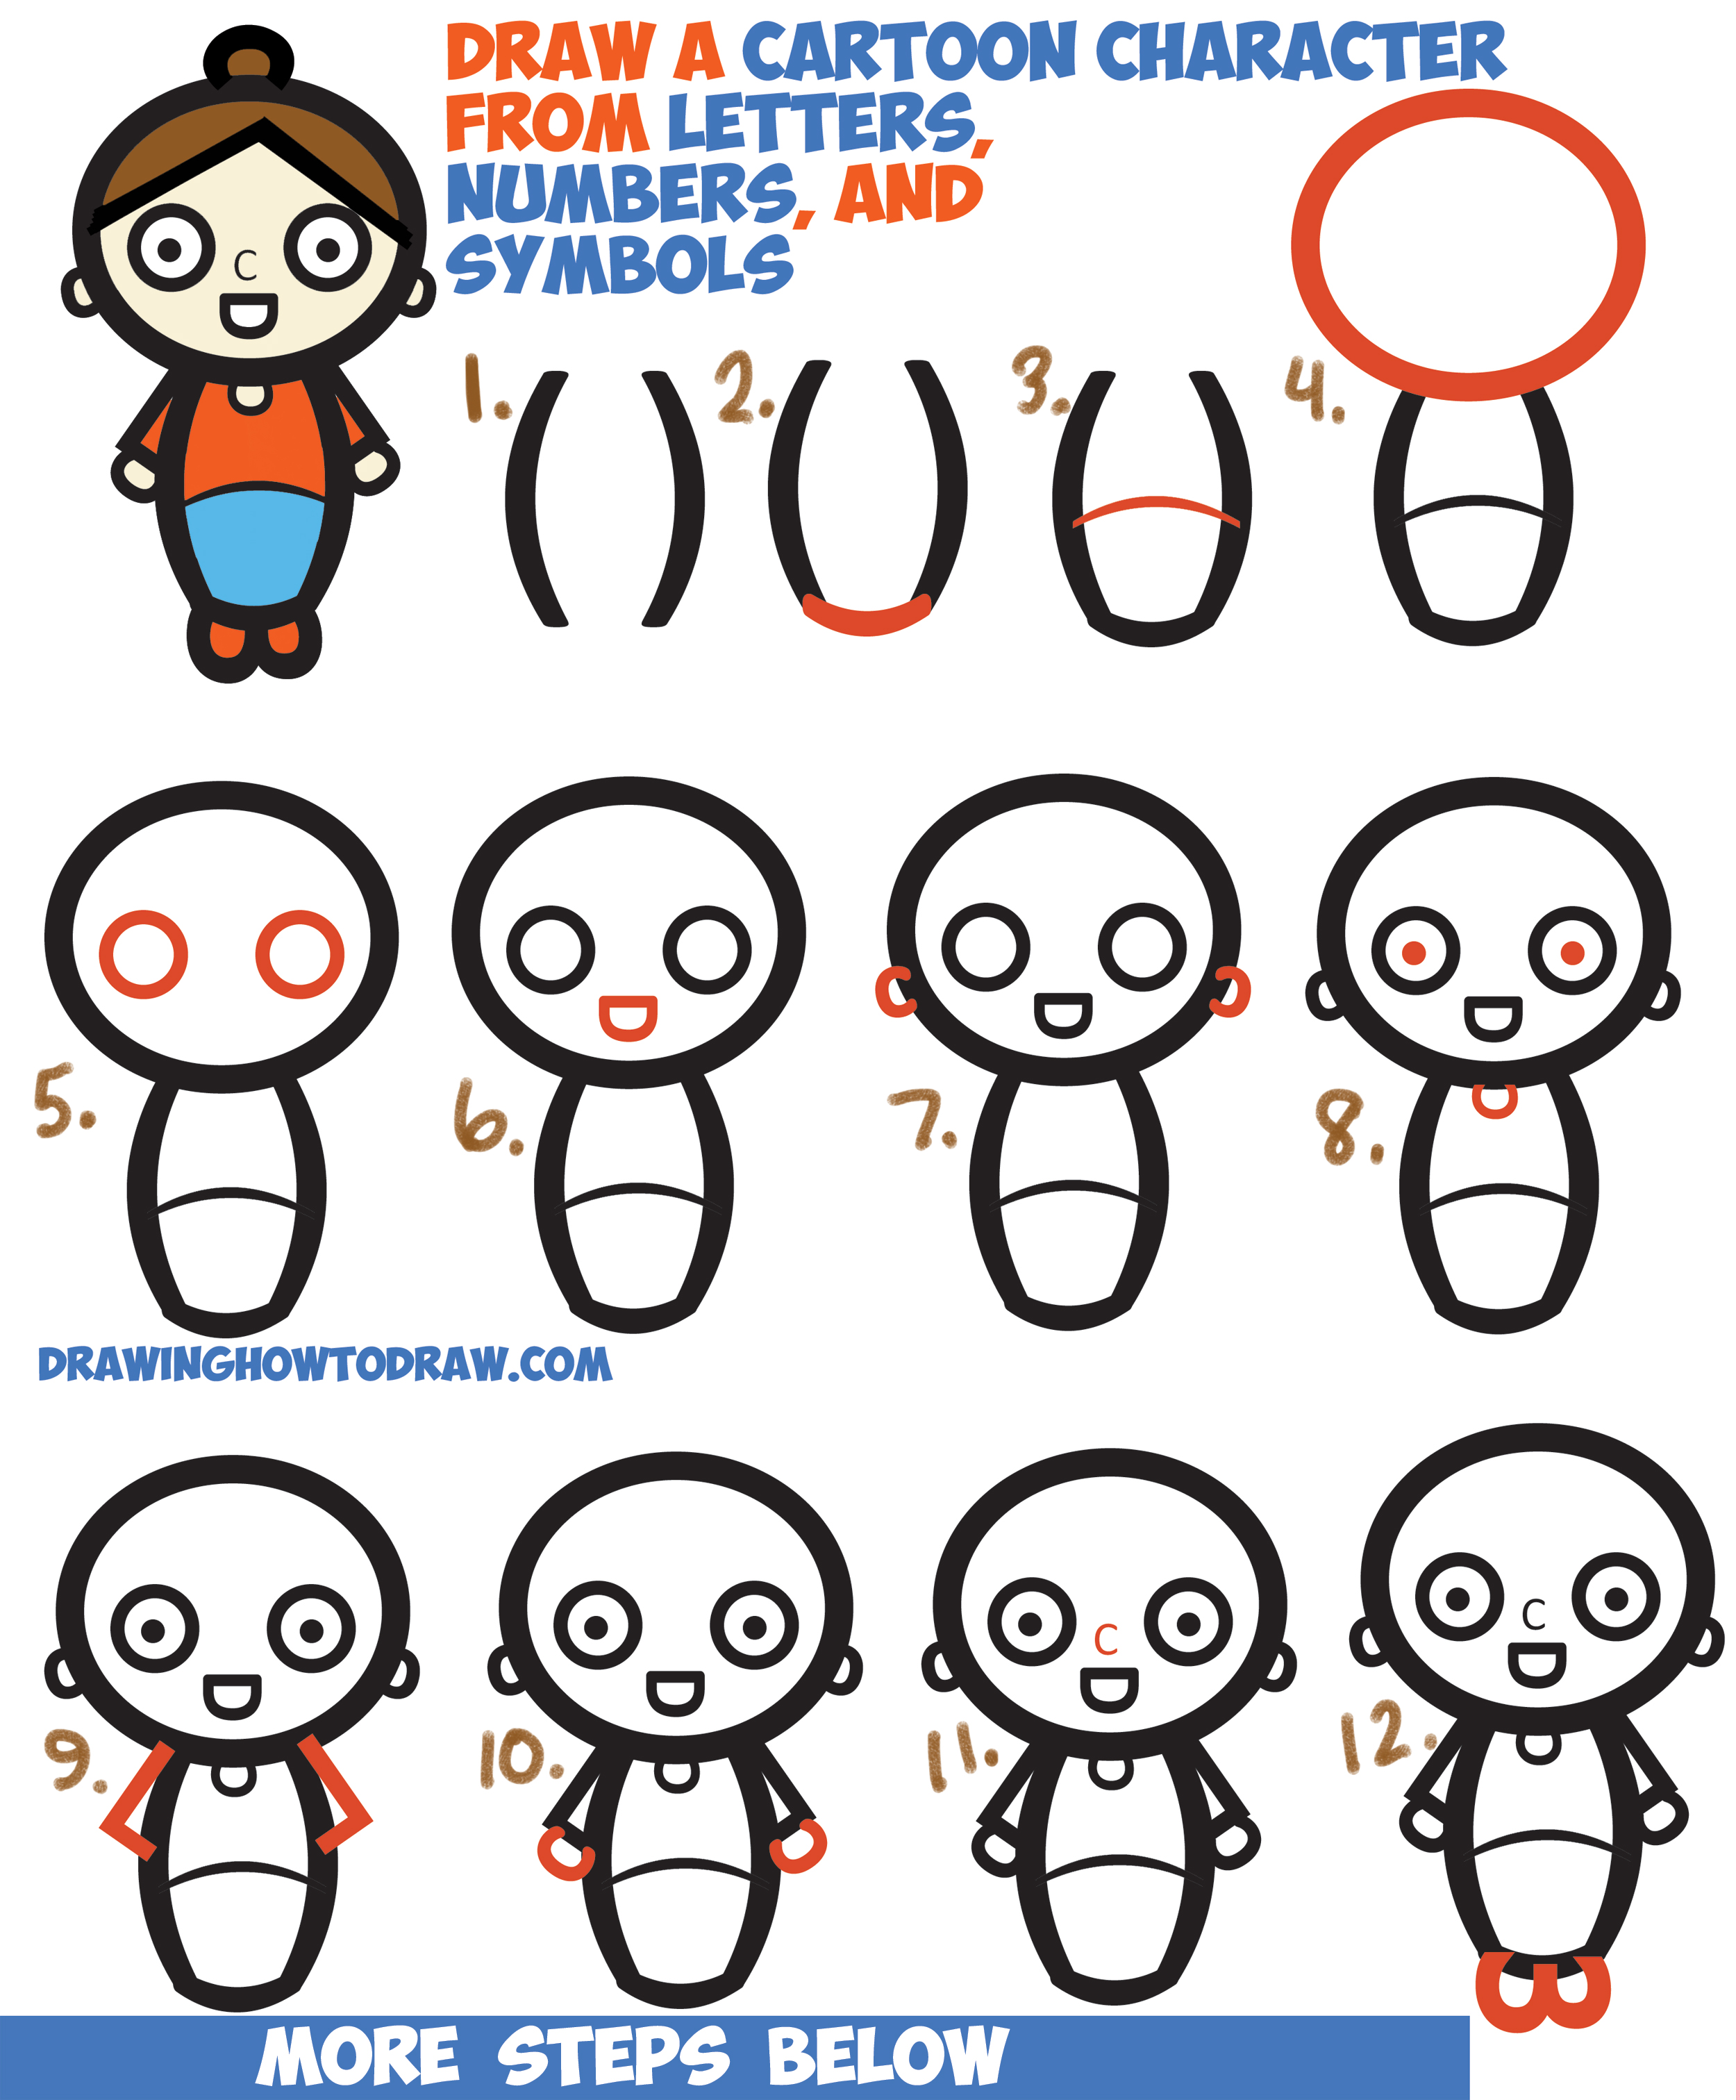 How to Draw a Cartoon Woman Character from Letters Numbers & Symbols